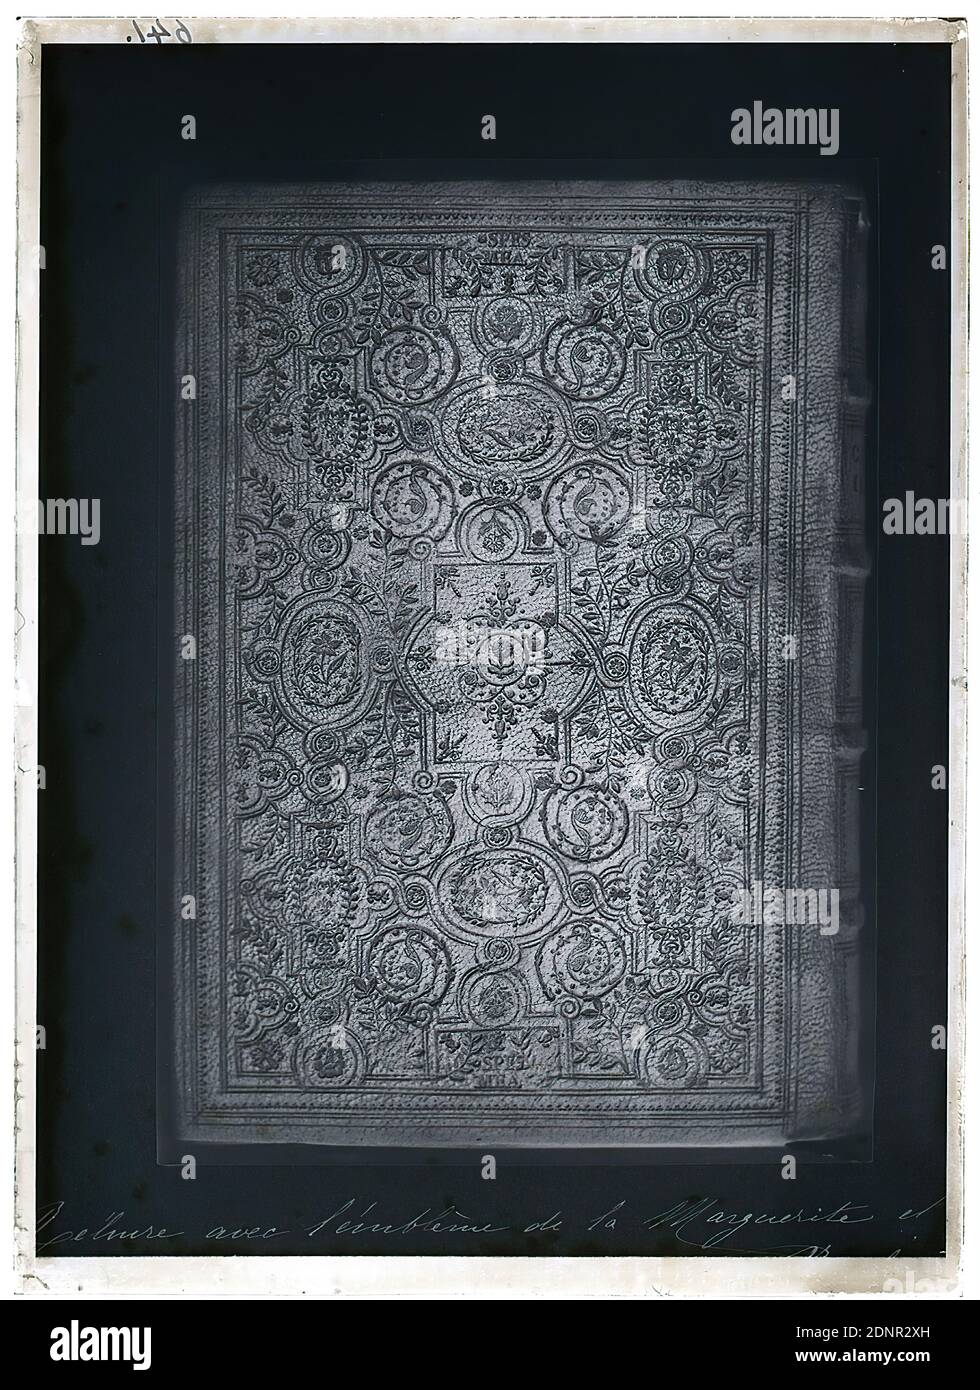 Wilhelm Weimar, book cover, glass negative, black and white negative process, total: height: 23.8 cm; width: 17.8 cm, numbered: top left. : in black ink: 641, factual photography, arts and crafts, industrial design, book Stock Photo